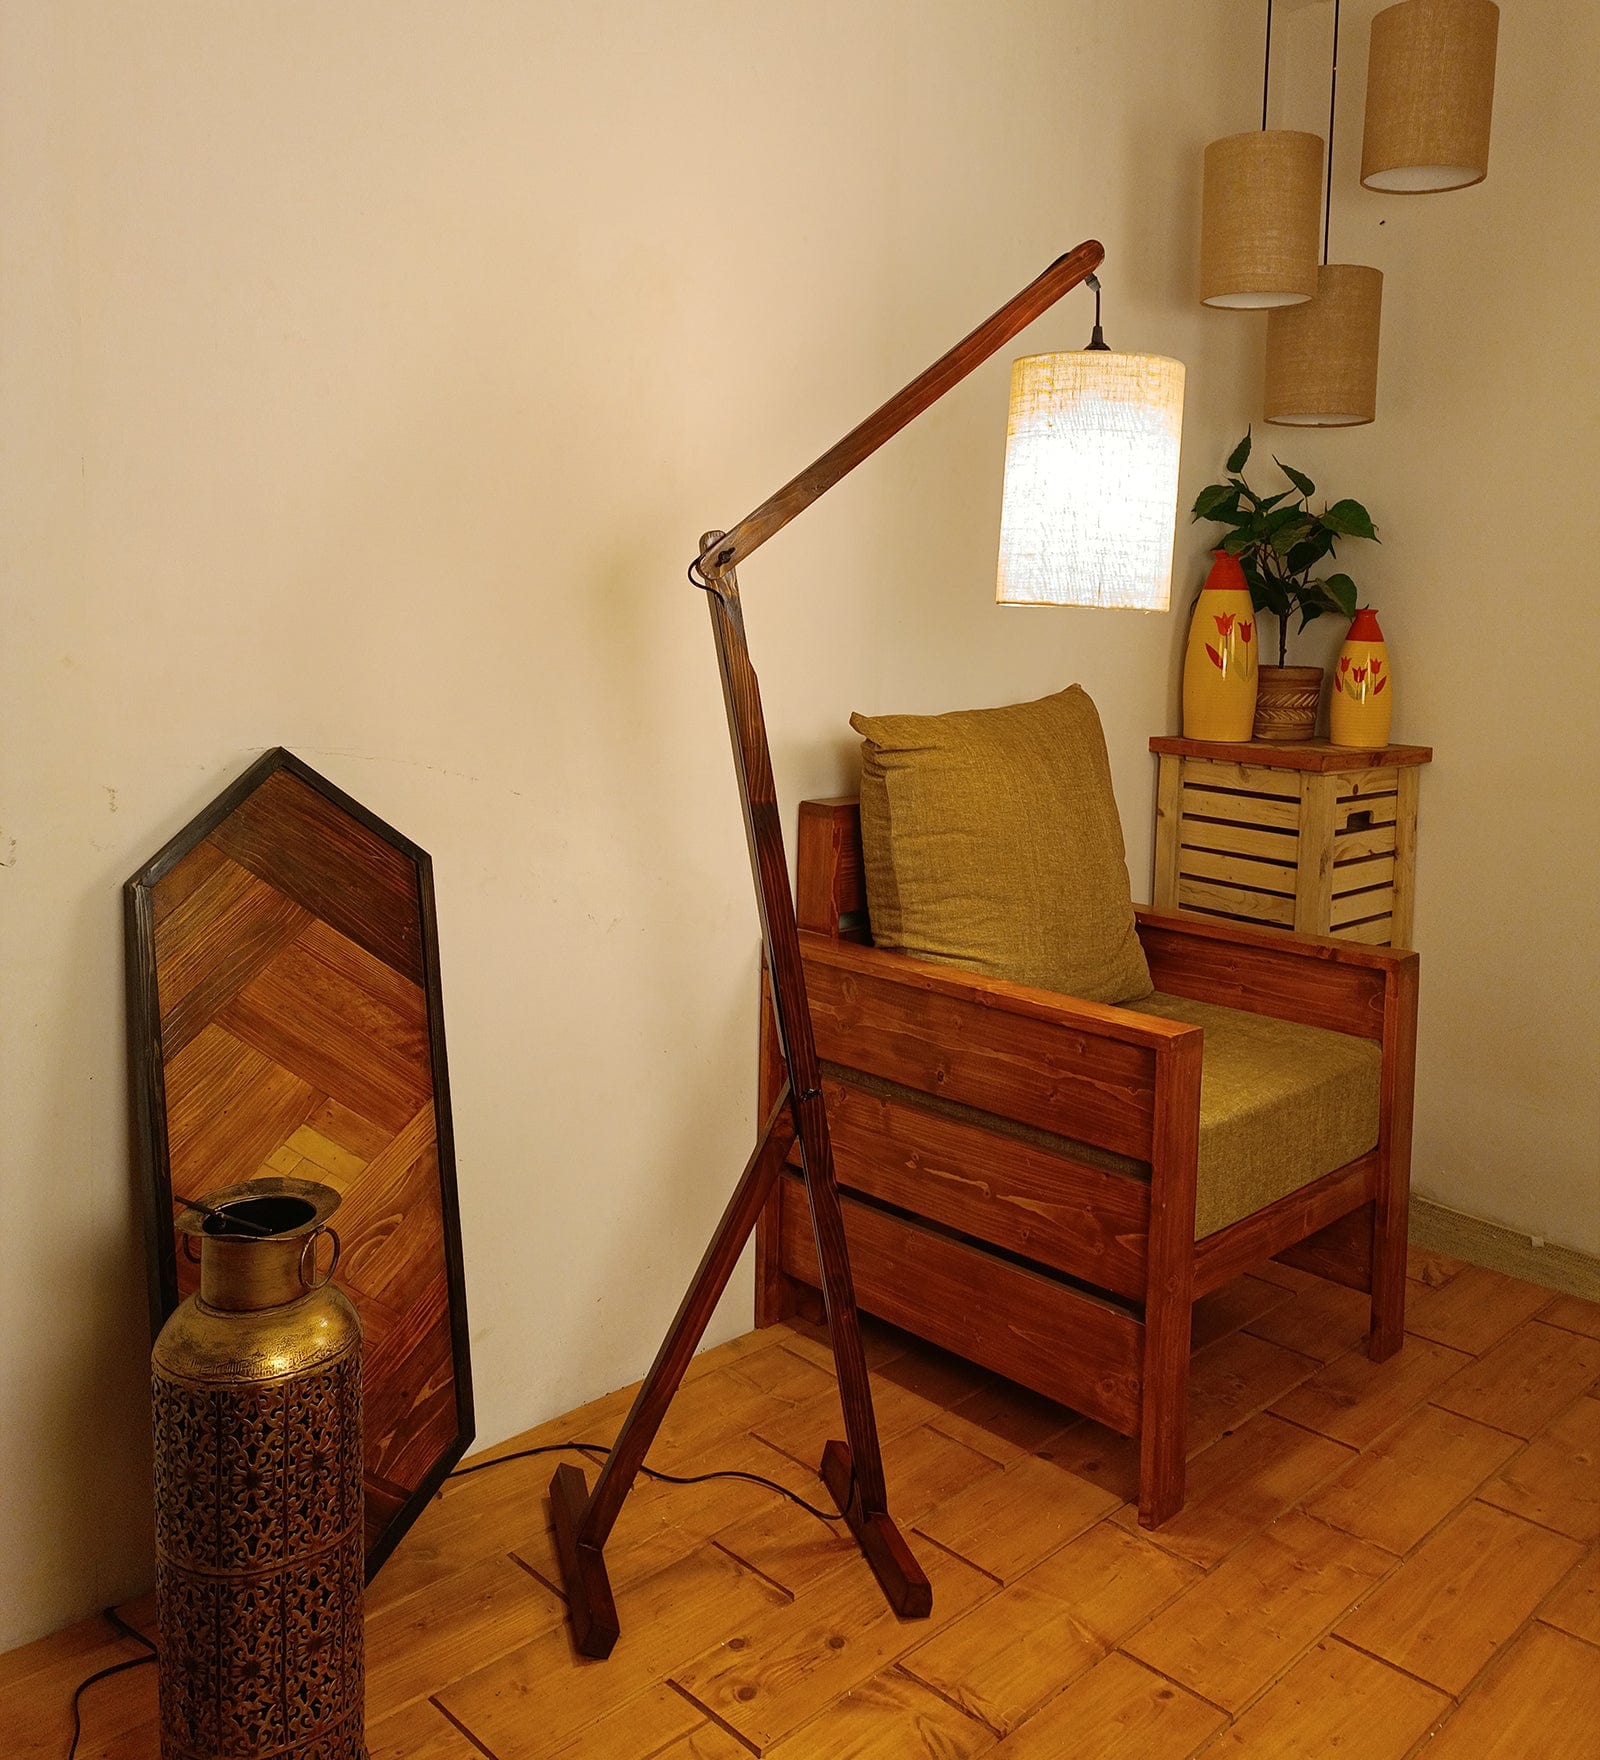 Benji Wooden Floor Lamp with Brown Base and Beige Fabric Lampshade (BULB NOT INCLUDED)